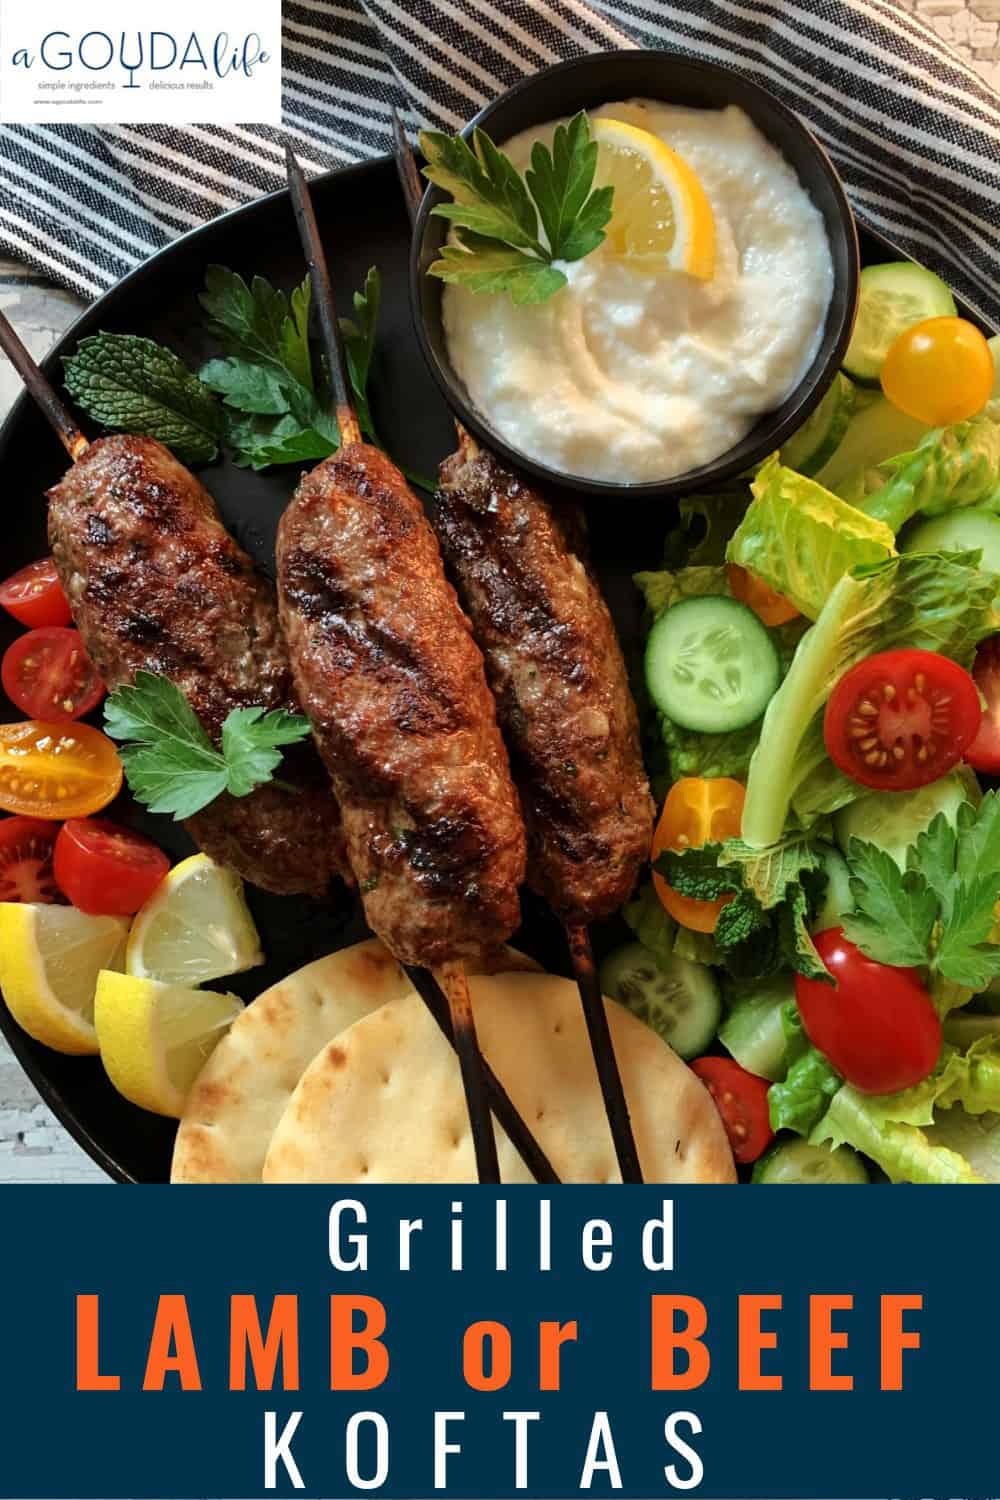 pinterest pin showing black plate with 3 kofta kabobs, naan bread and tzatziki